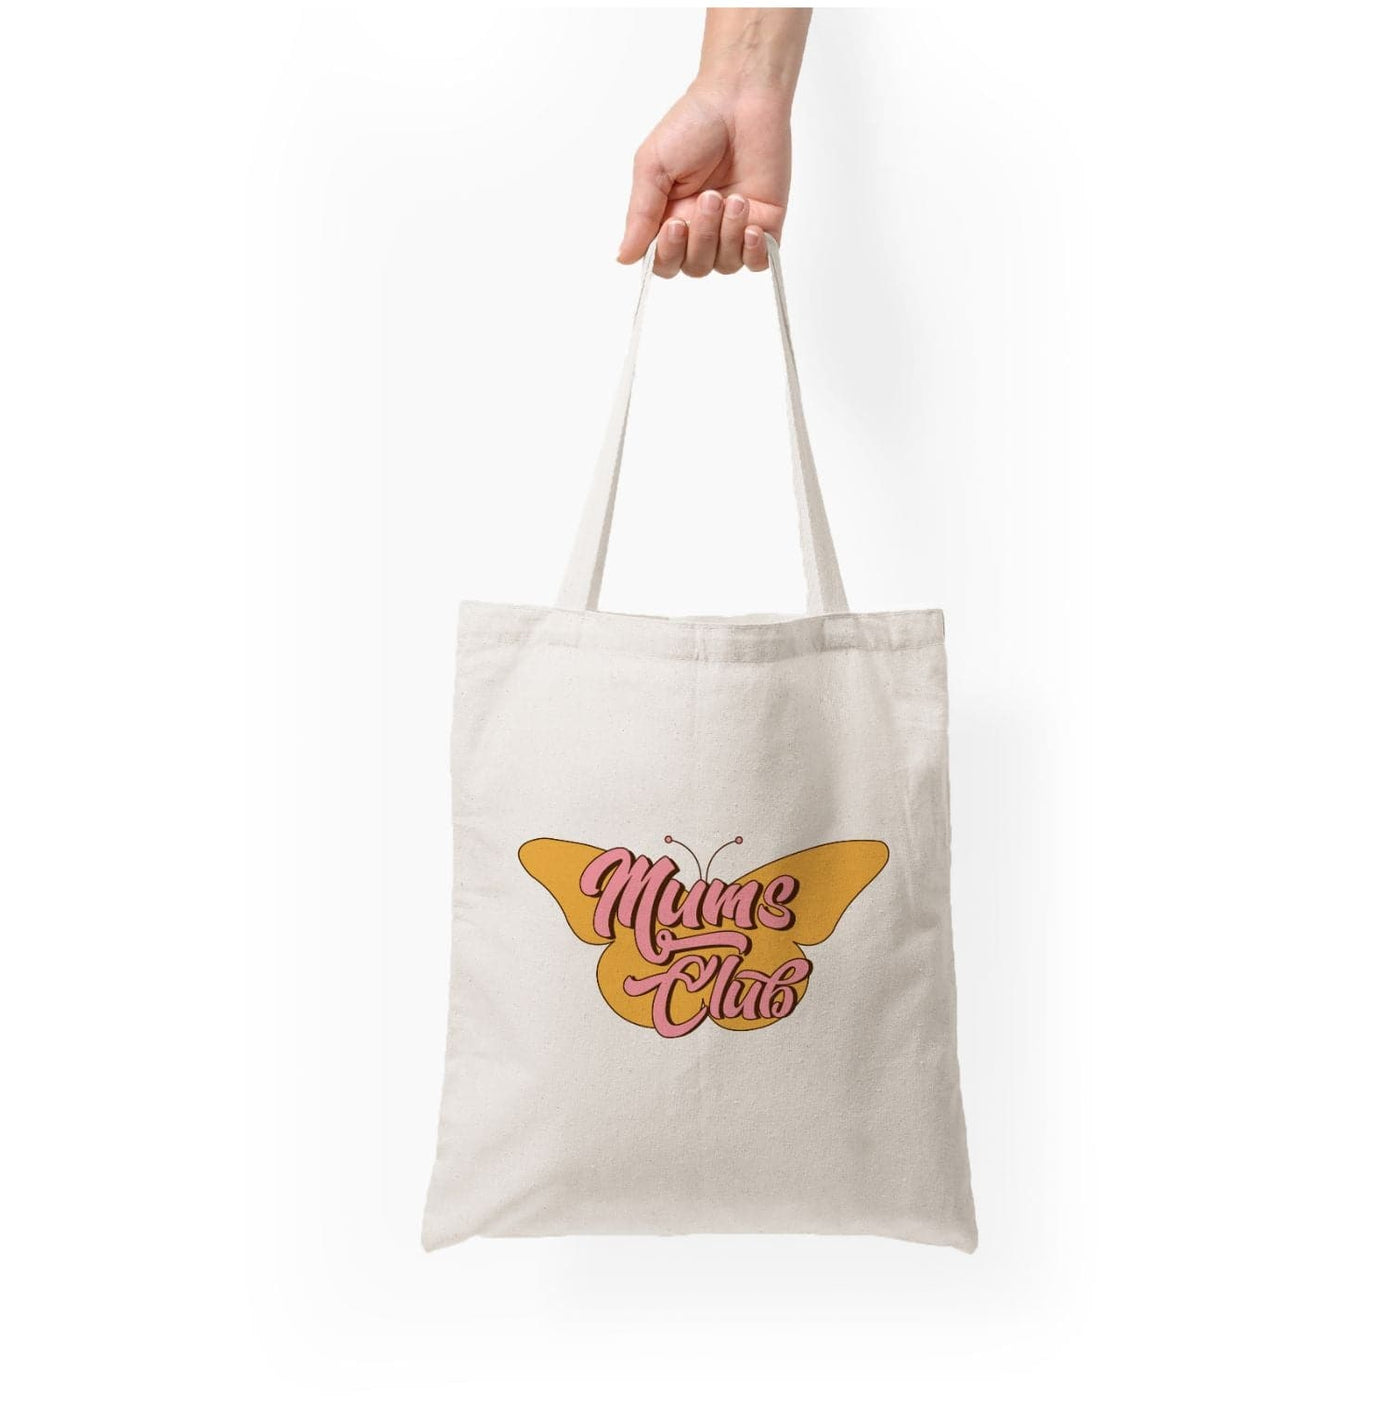 Mums Club - Mothers Day Tote Bag